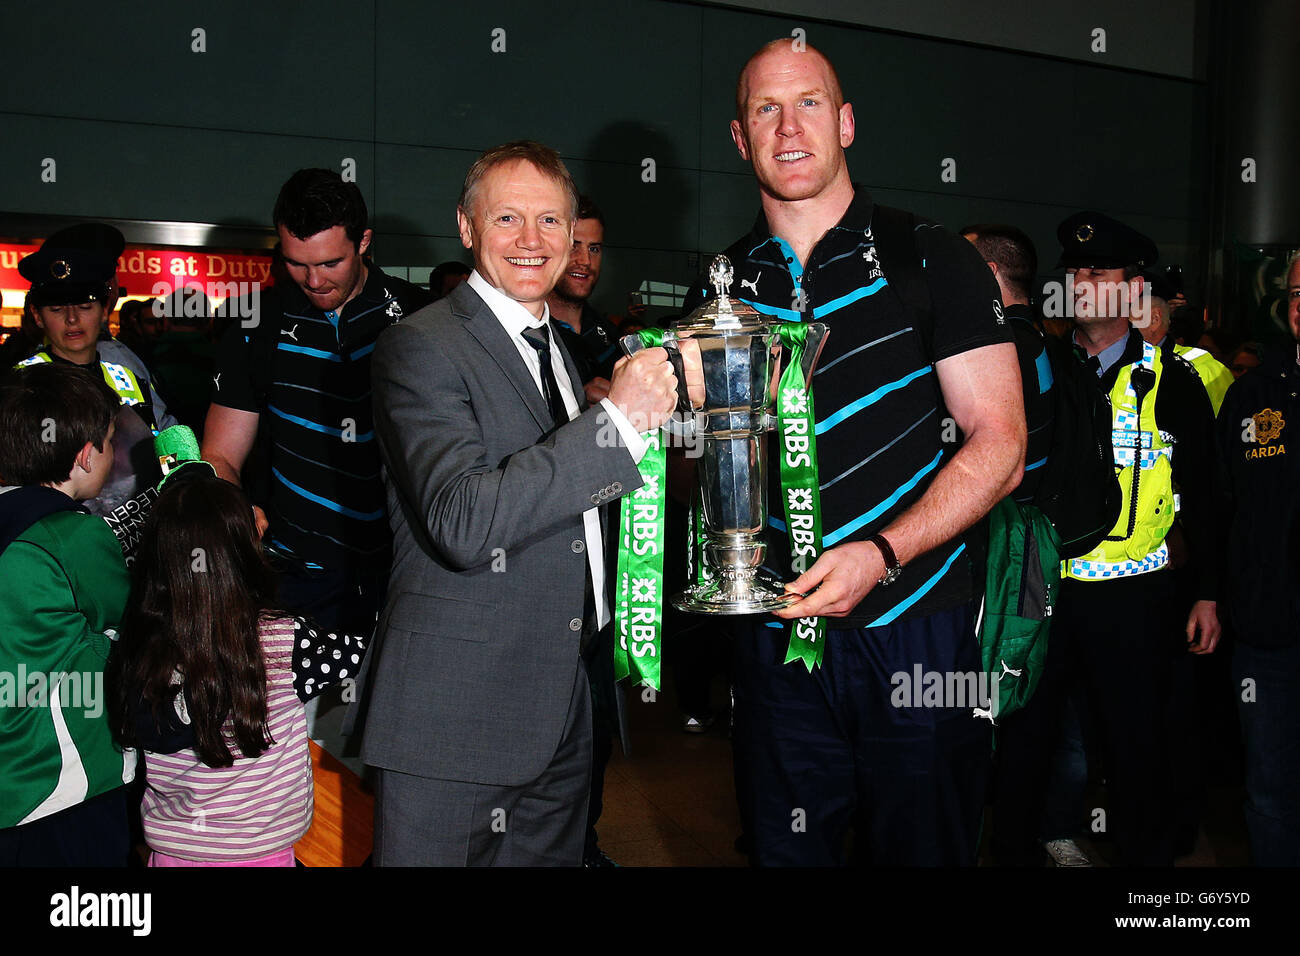 Ireland captain Paul O'Connell (right) and head coach Joe Schmidt with the 6 nations trophy as the Ireland team arrive at Dublin Airport, Ireland. Stock Photo